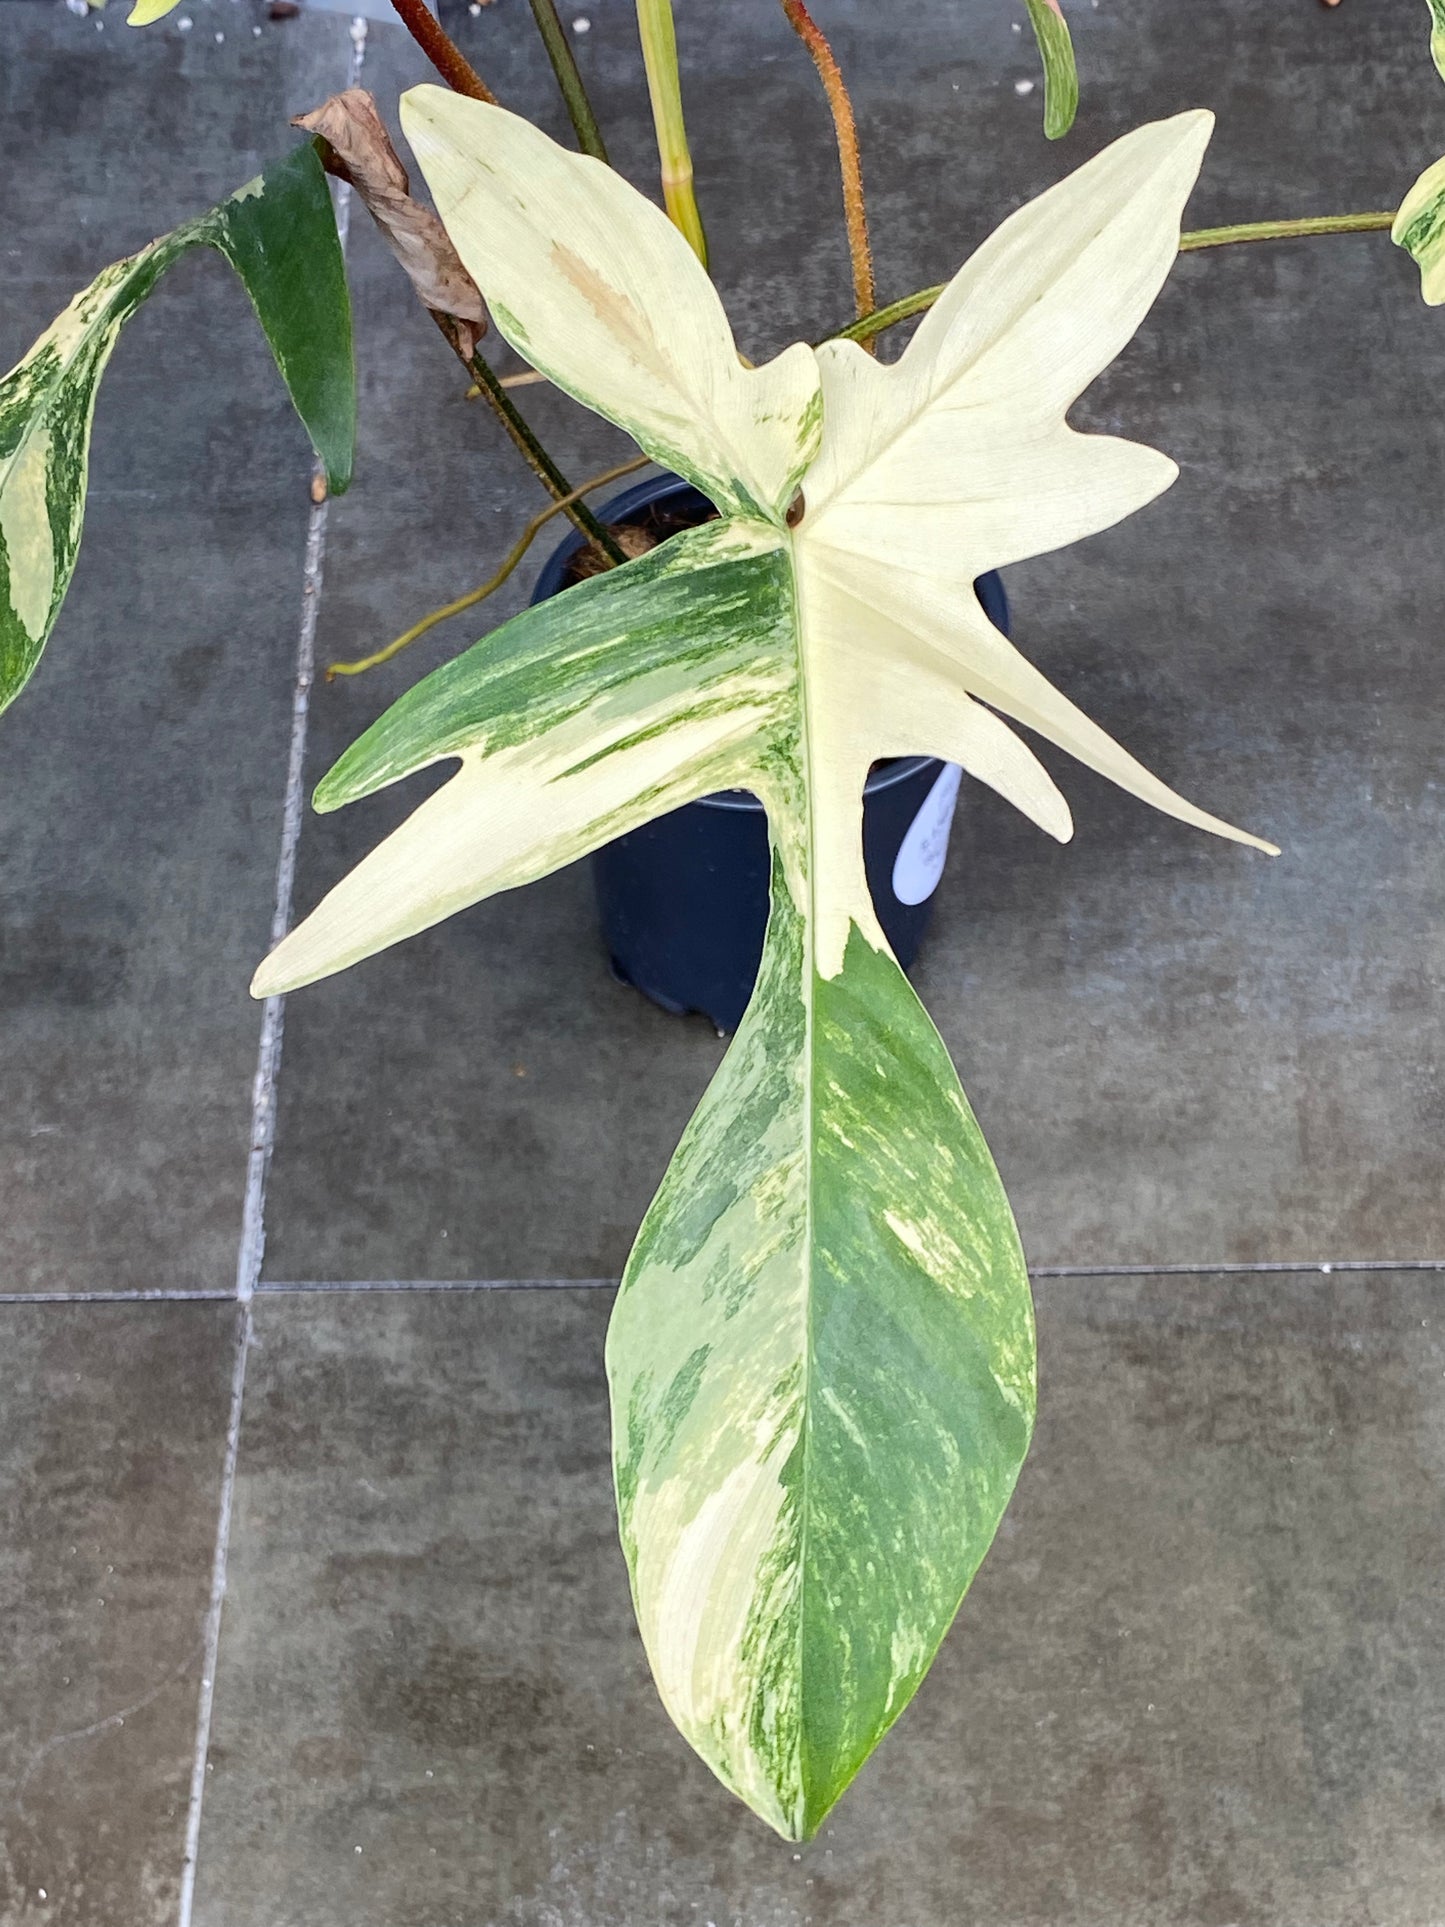 Philodendron Florida Beauty